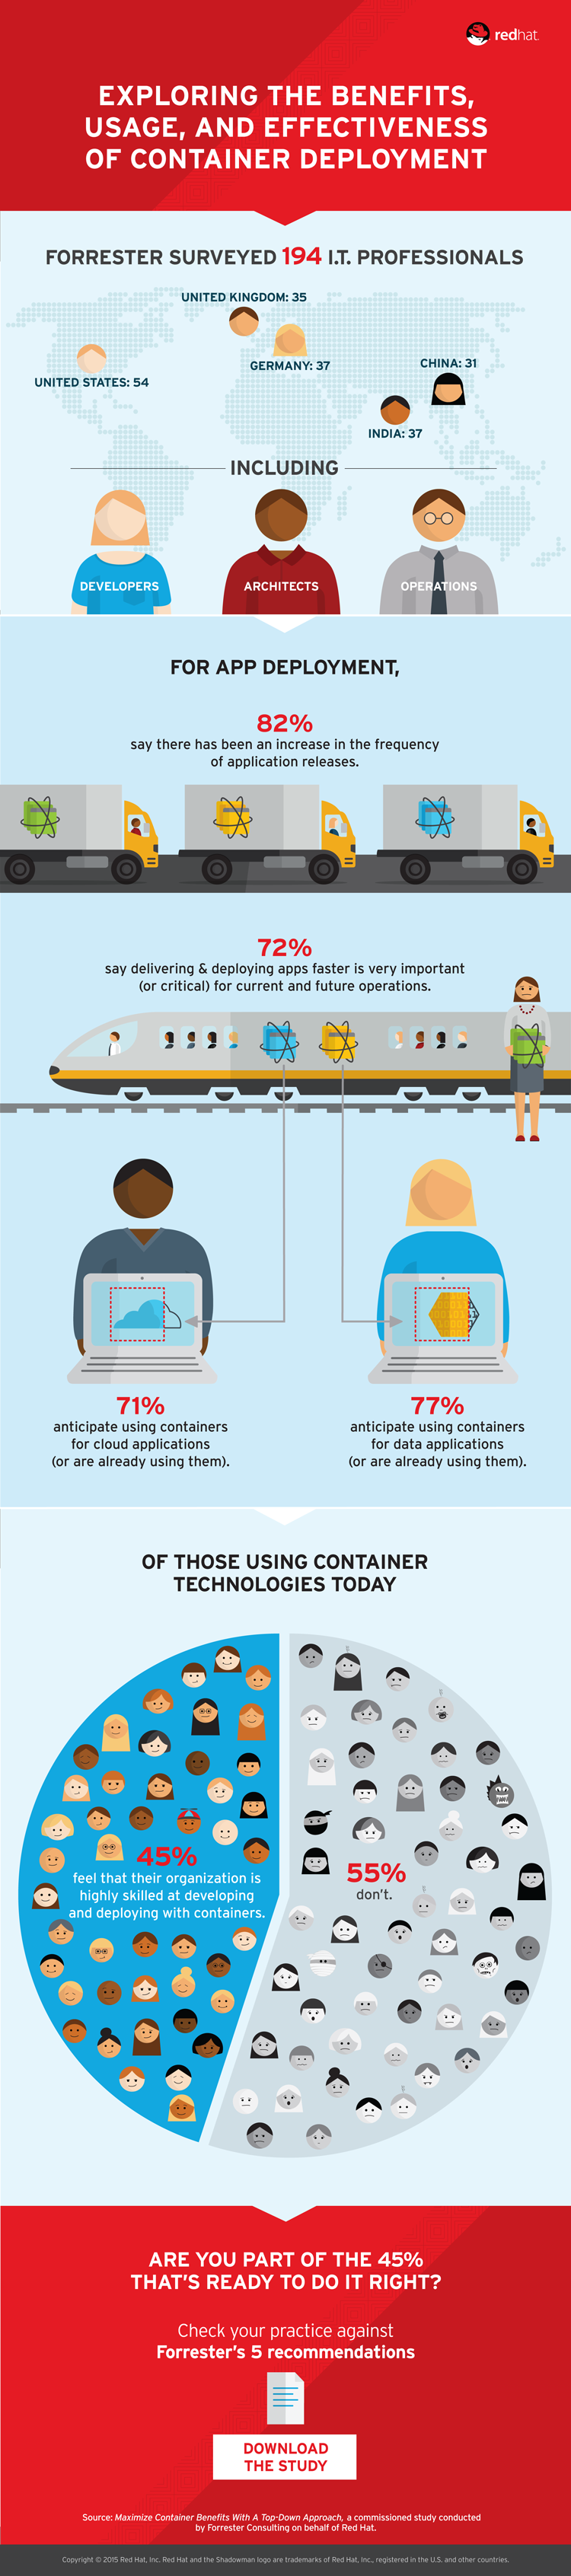 Are You Ready for Linux Containers in Your Enterprise?